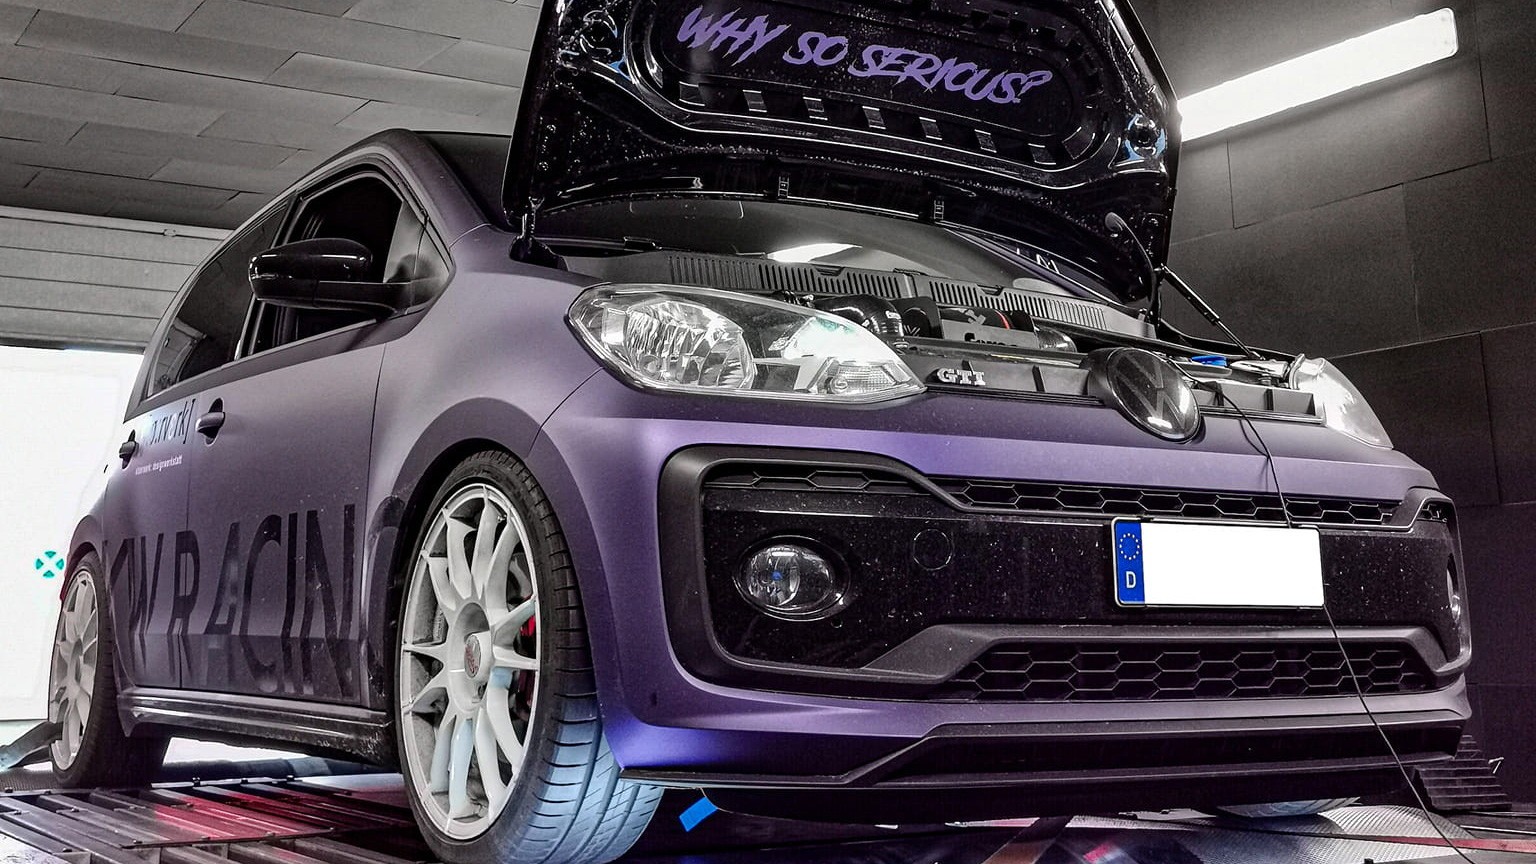 https://s1.cdn.autoevolution.com/images/news/gallery/tuned-vw-up-gti-is-one-awd-system-away-from-getting-the-r-moniker_3.jpg